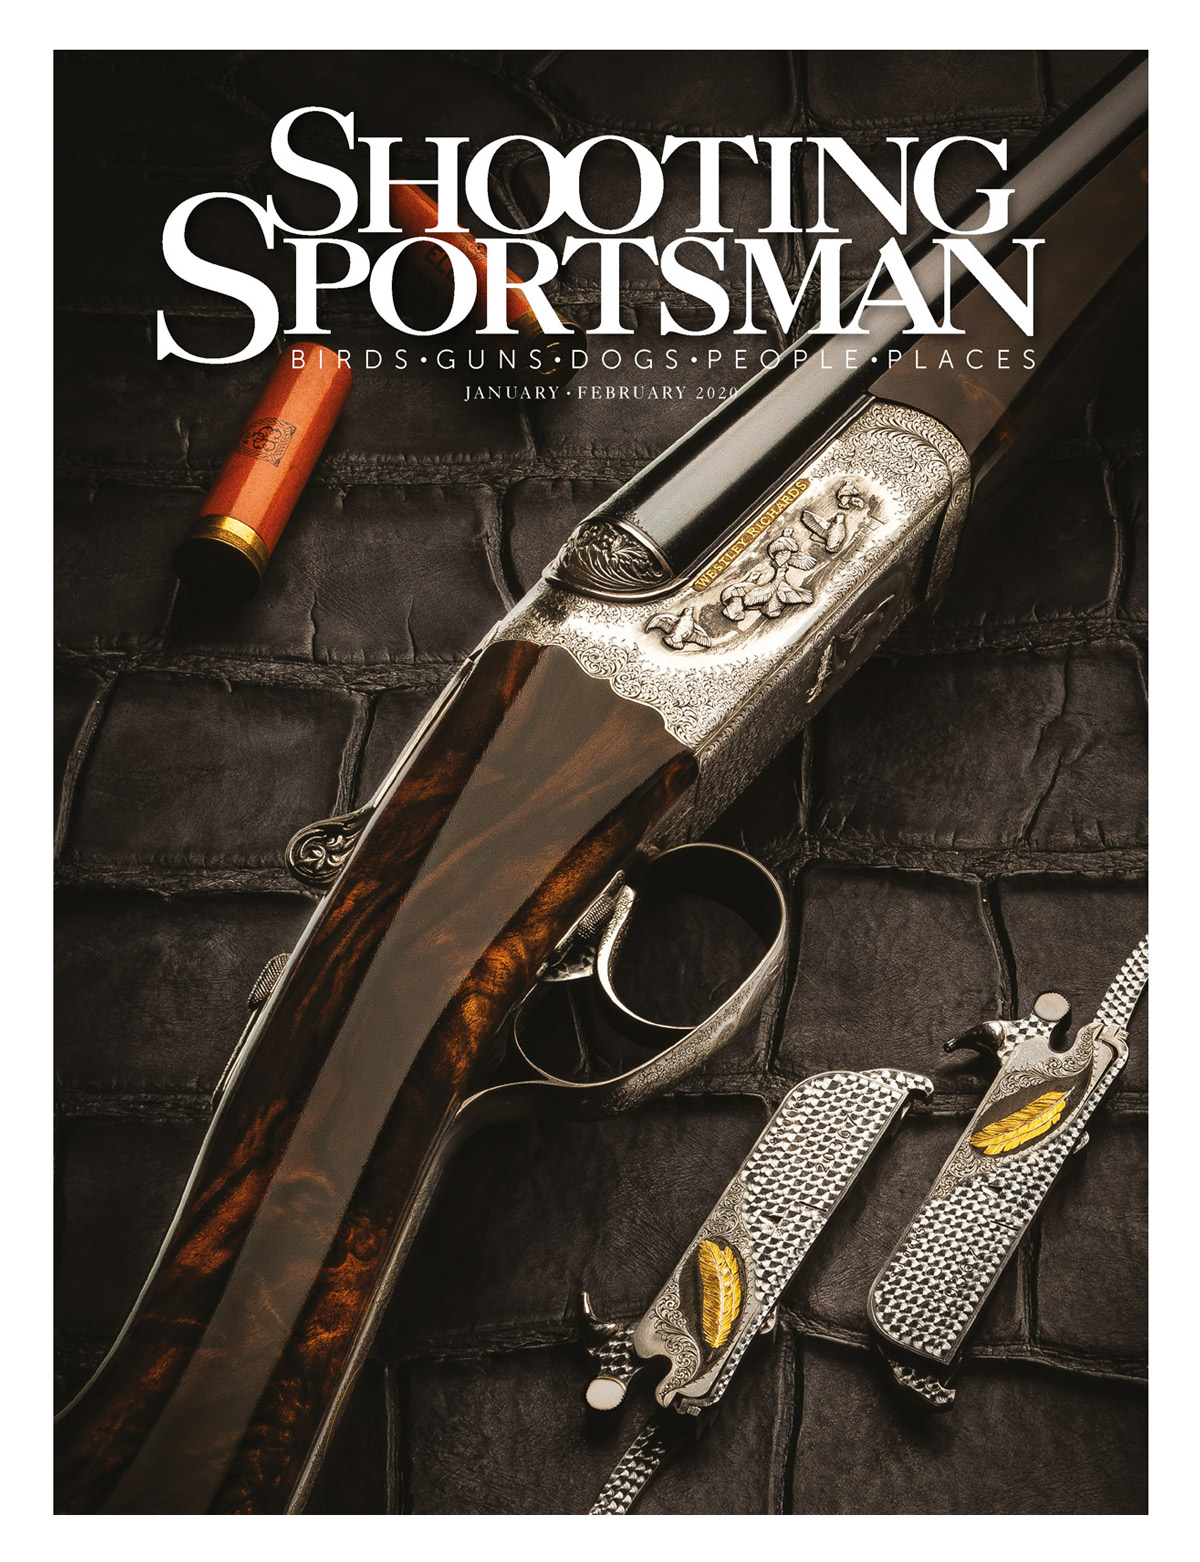 We're On The Cover Of Shooting Sportsman